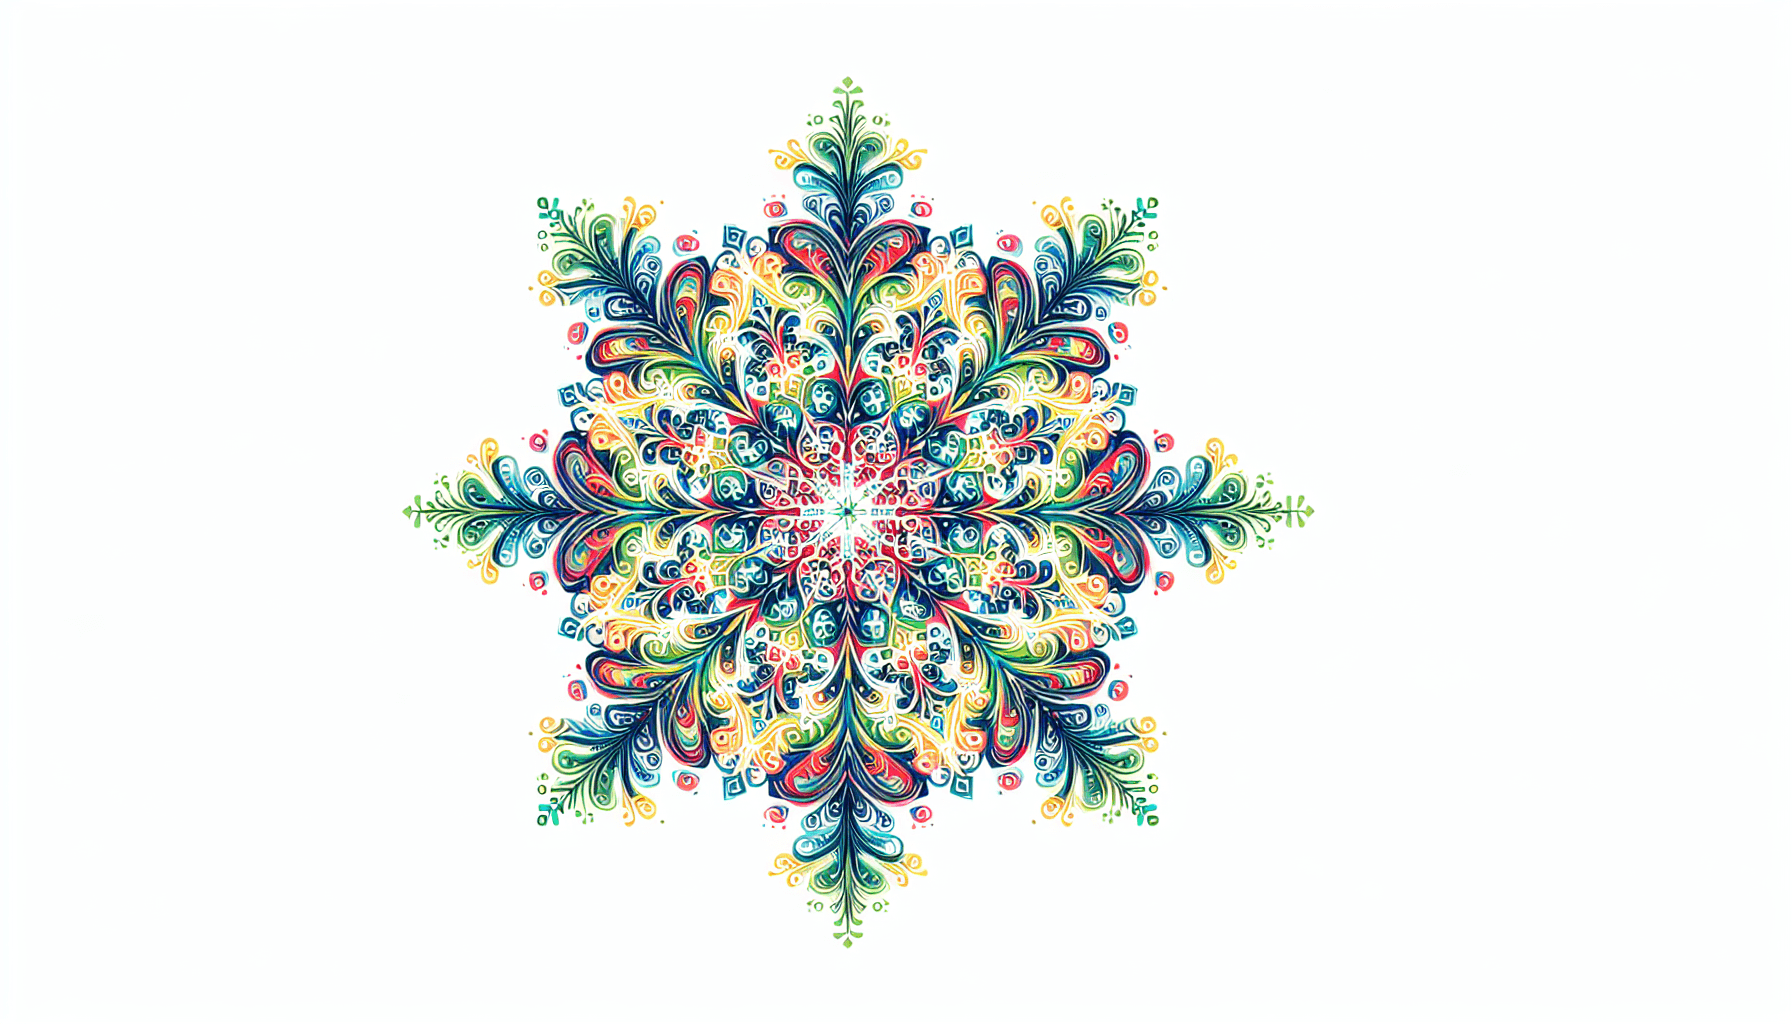 Snowflake in flat illustration style and white background, red #f47574, green #88c7a8, yellow #fcc44b, and blue #645bc8 colors.